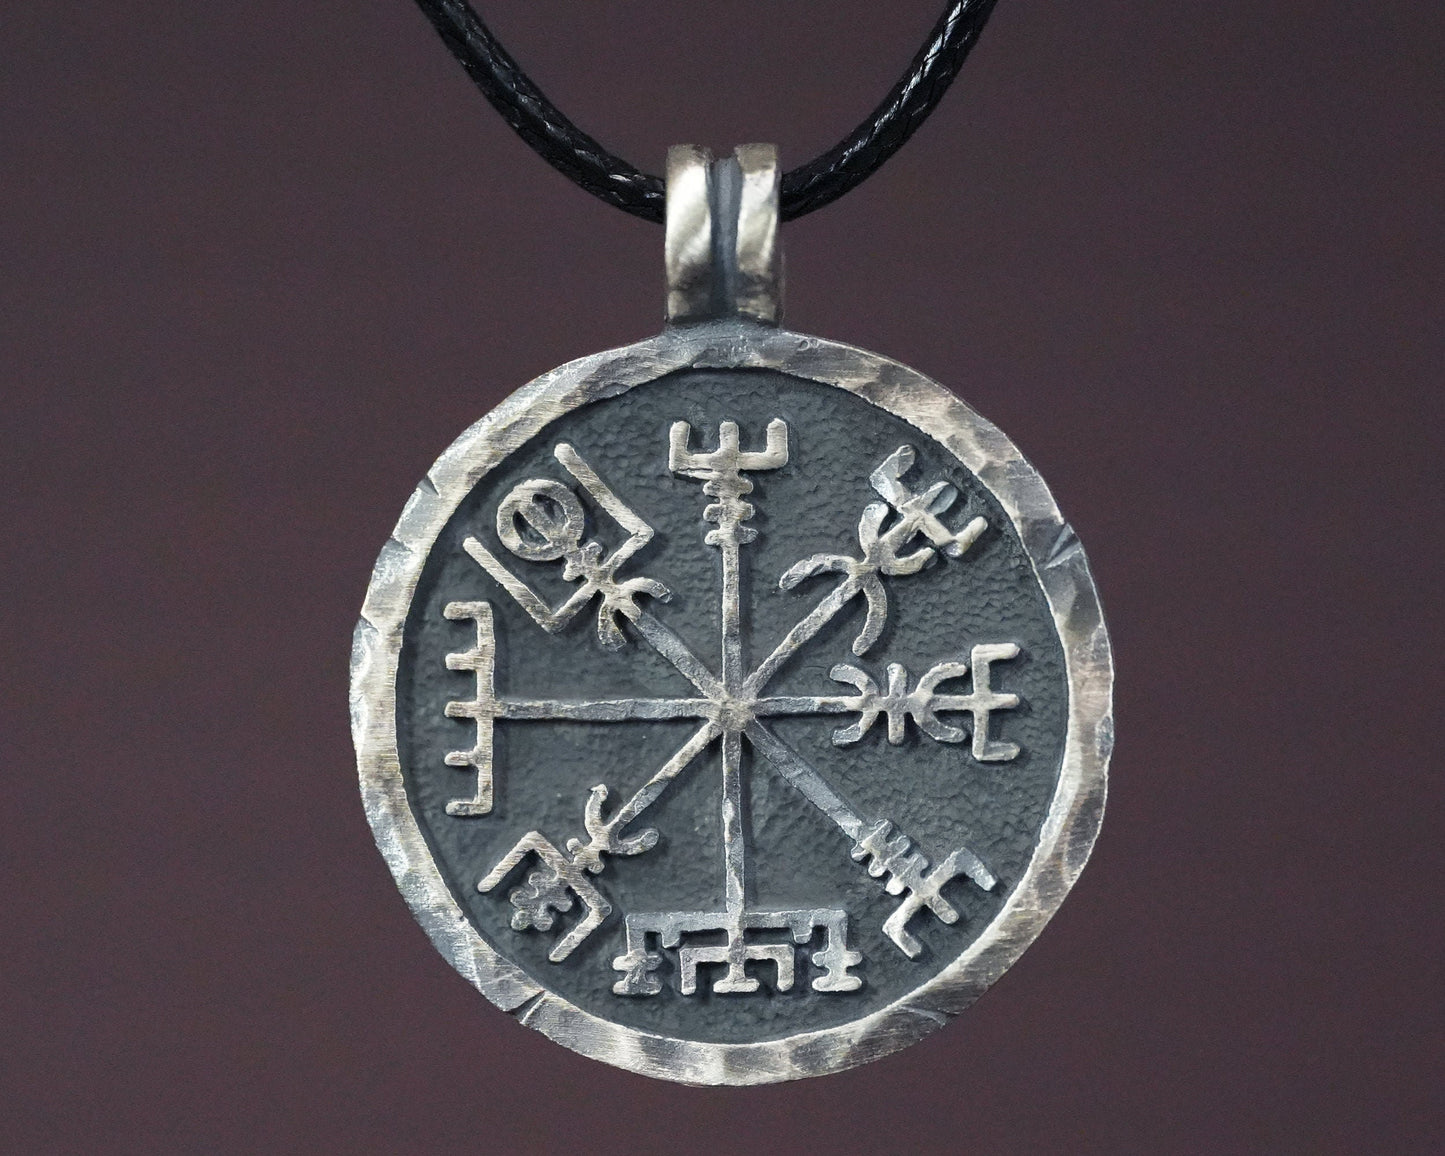 Men Compass North Star Necklace With Adjustable String Sterling Silver - Handmade By Gudbrand - Baldur Jewelry